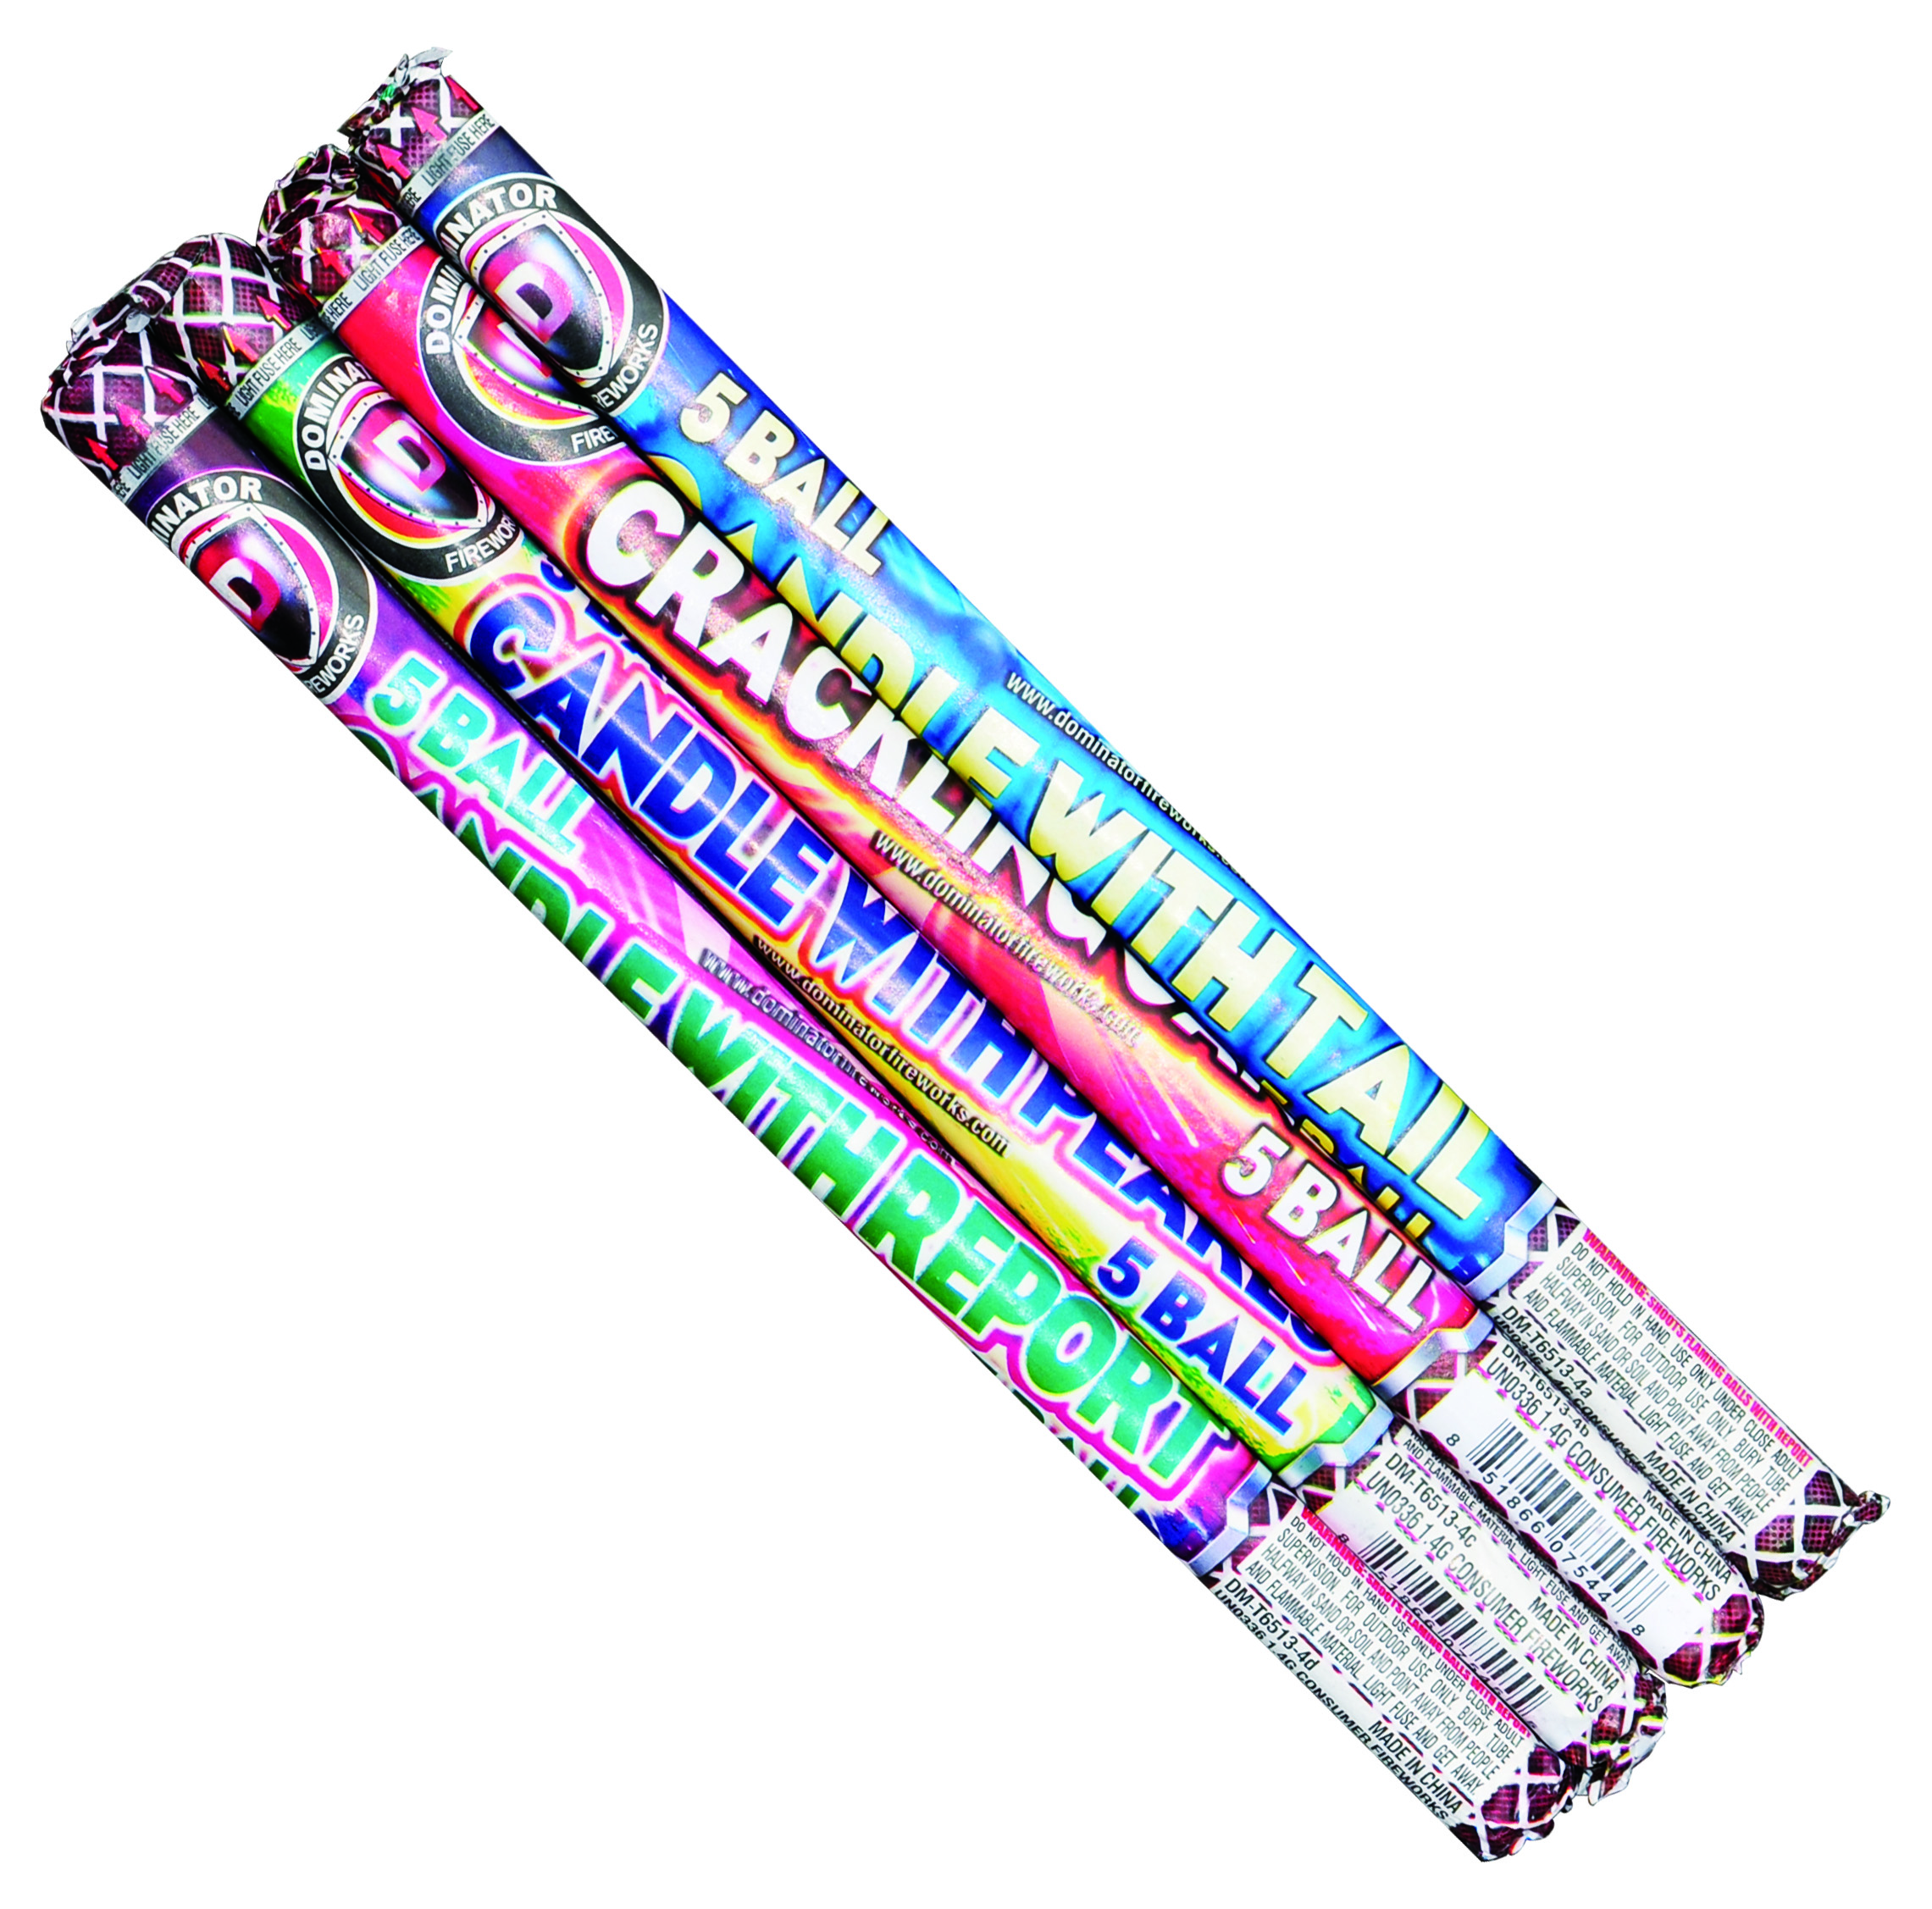 5 Ball Magical Roman Candle 4 Pack